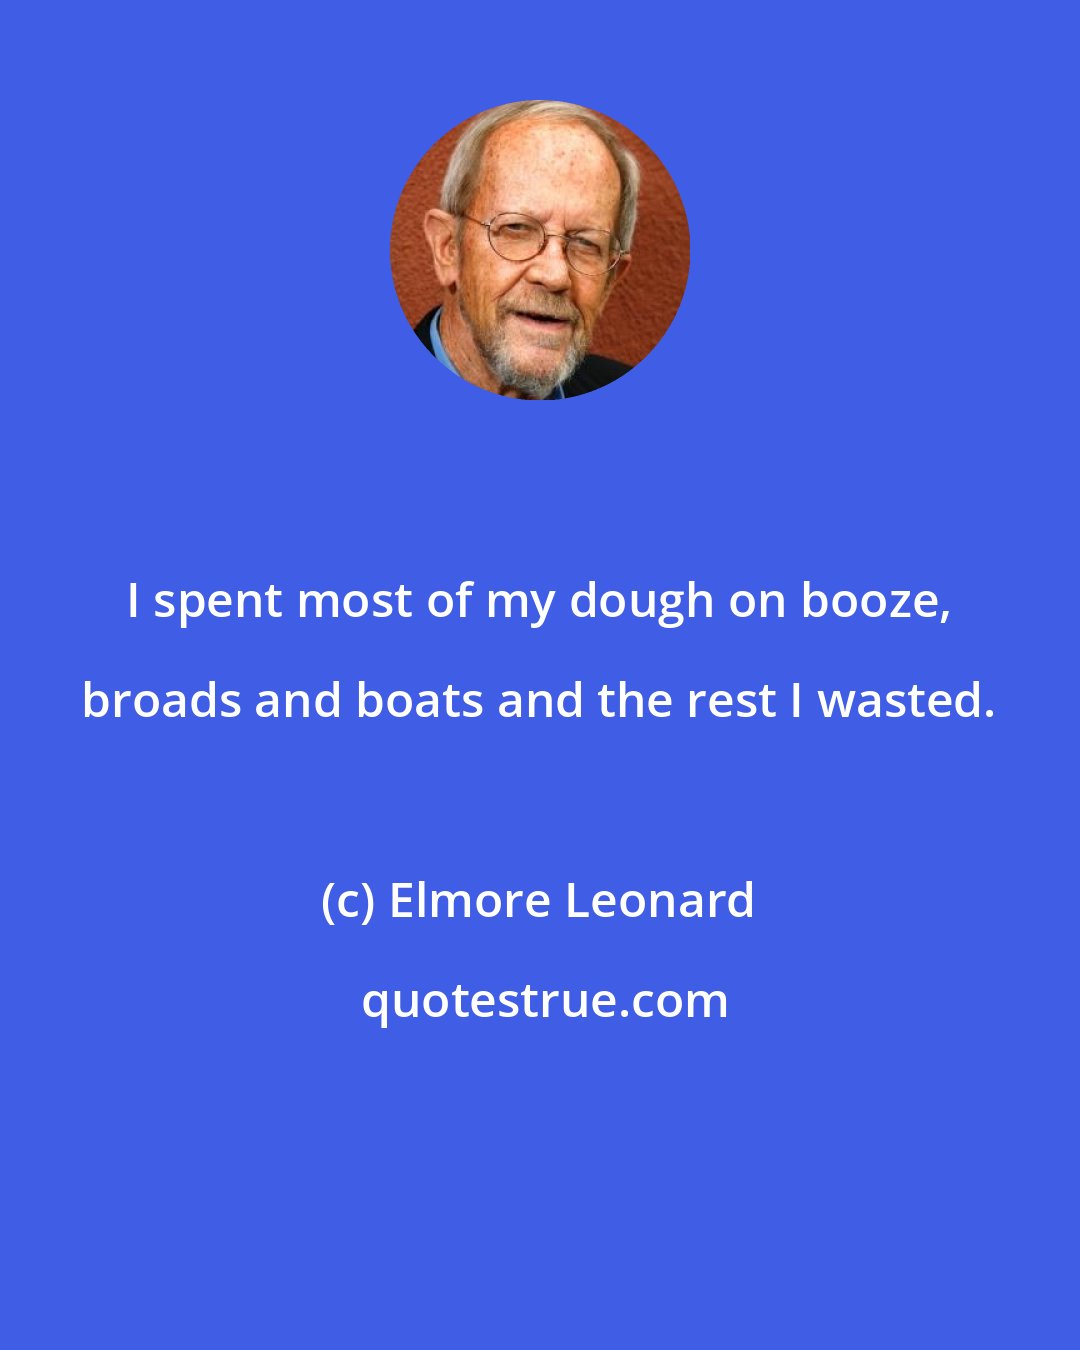 Elmore Leonard: I spent most of my dough on booze, broads and boats and the rest I wasted.